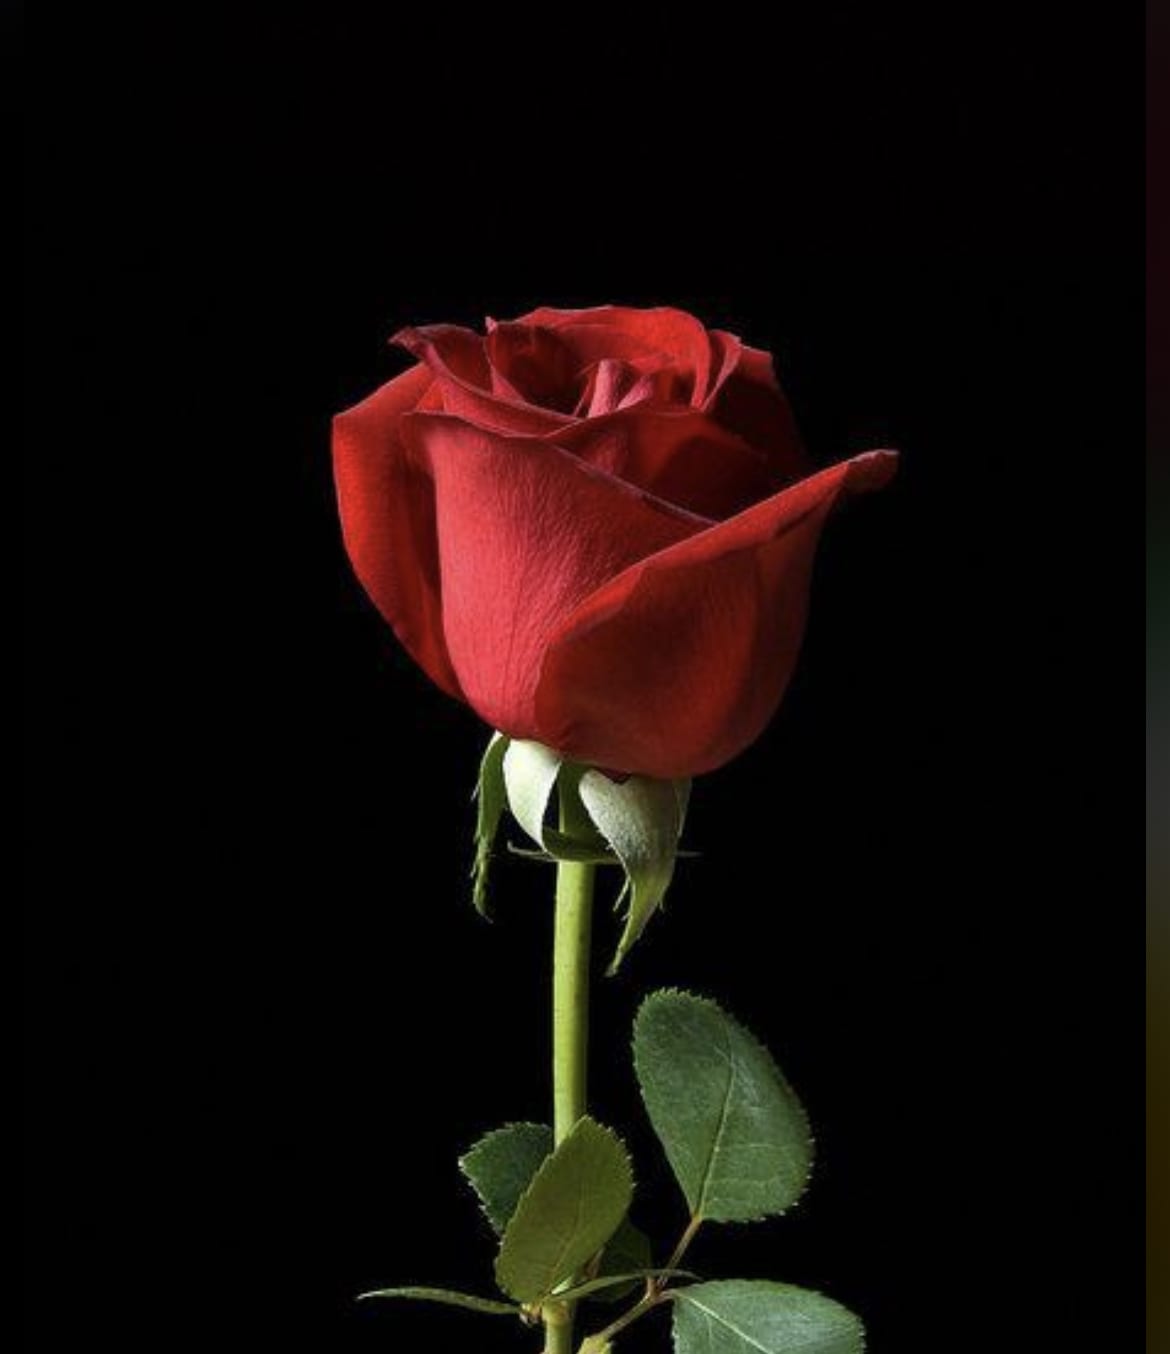 Single rose (any color) - Something perfect as a way to show appreciation in a romantic or celebratory way.